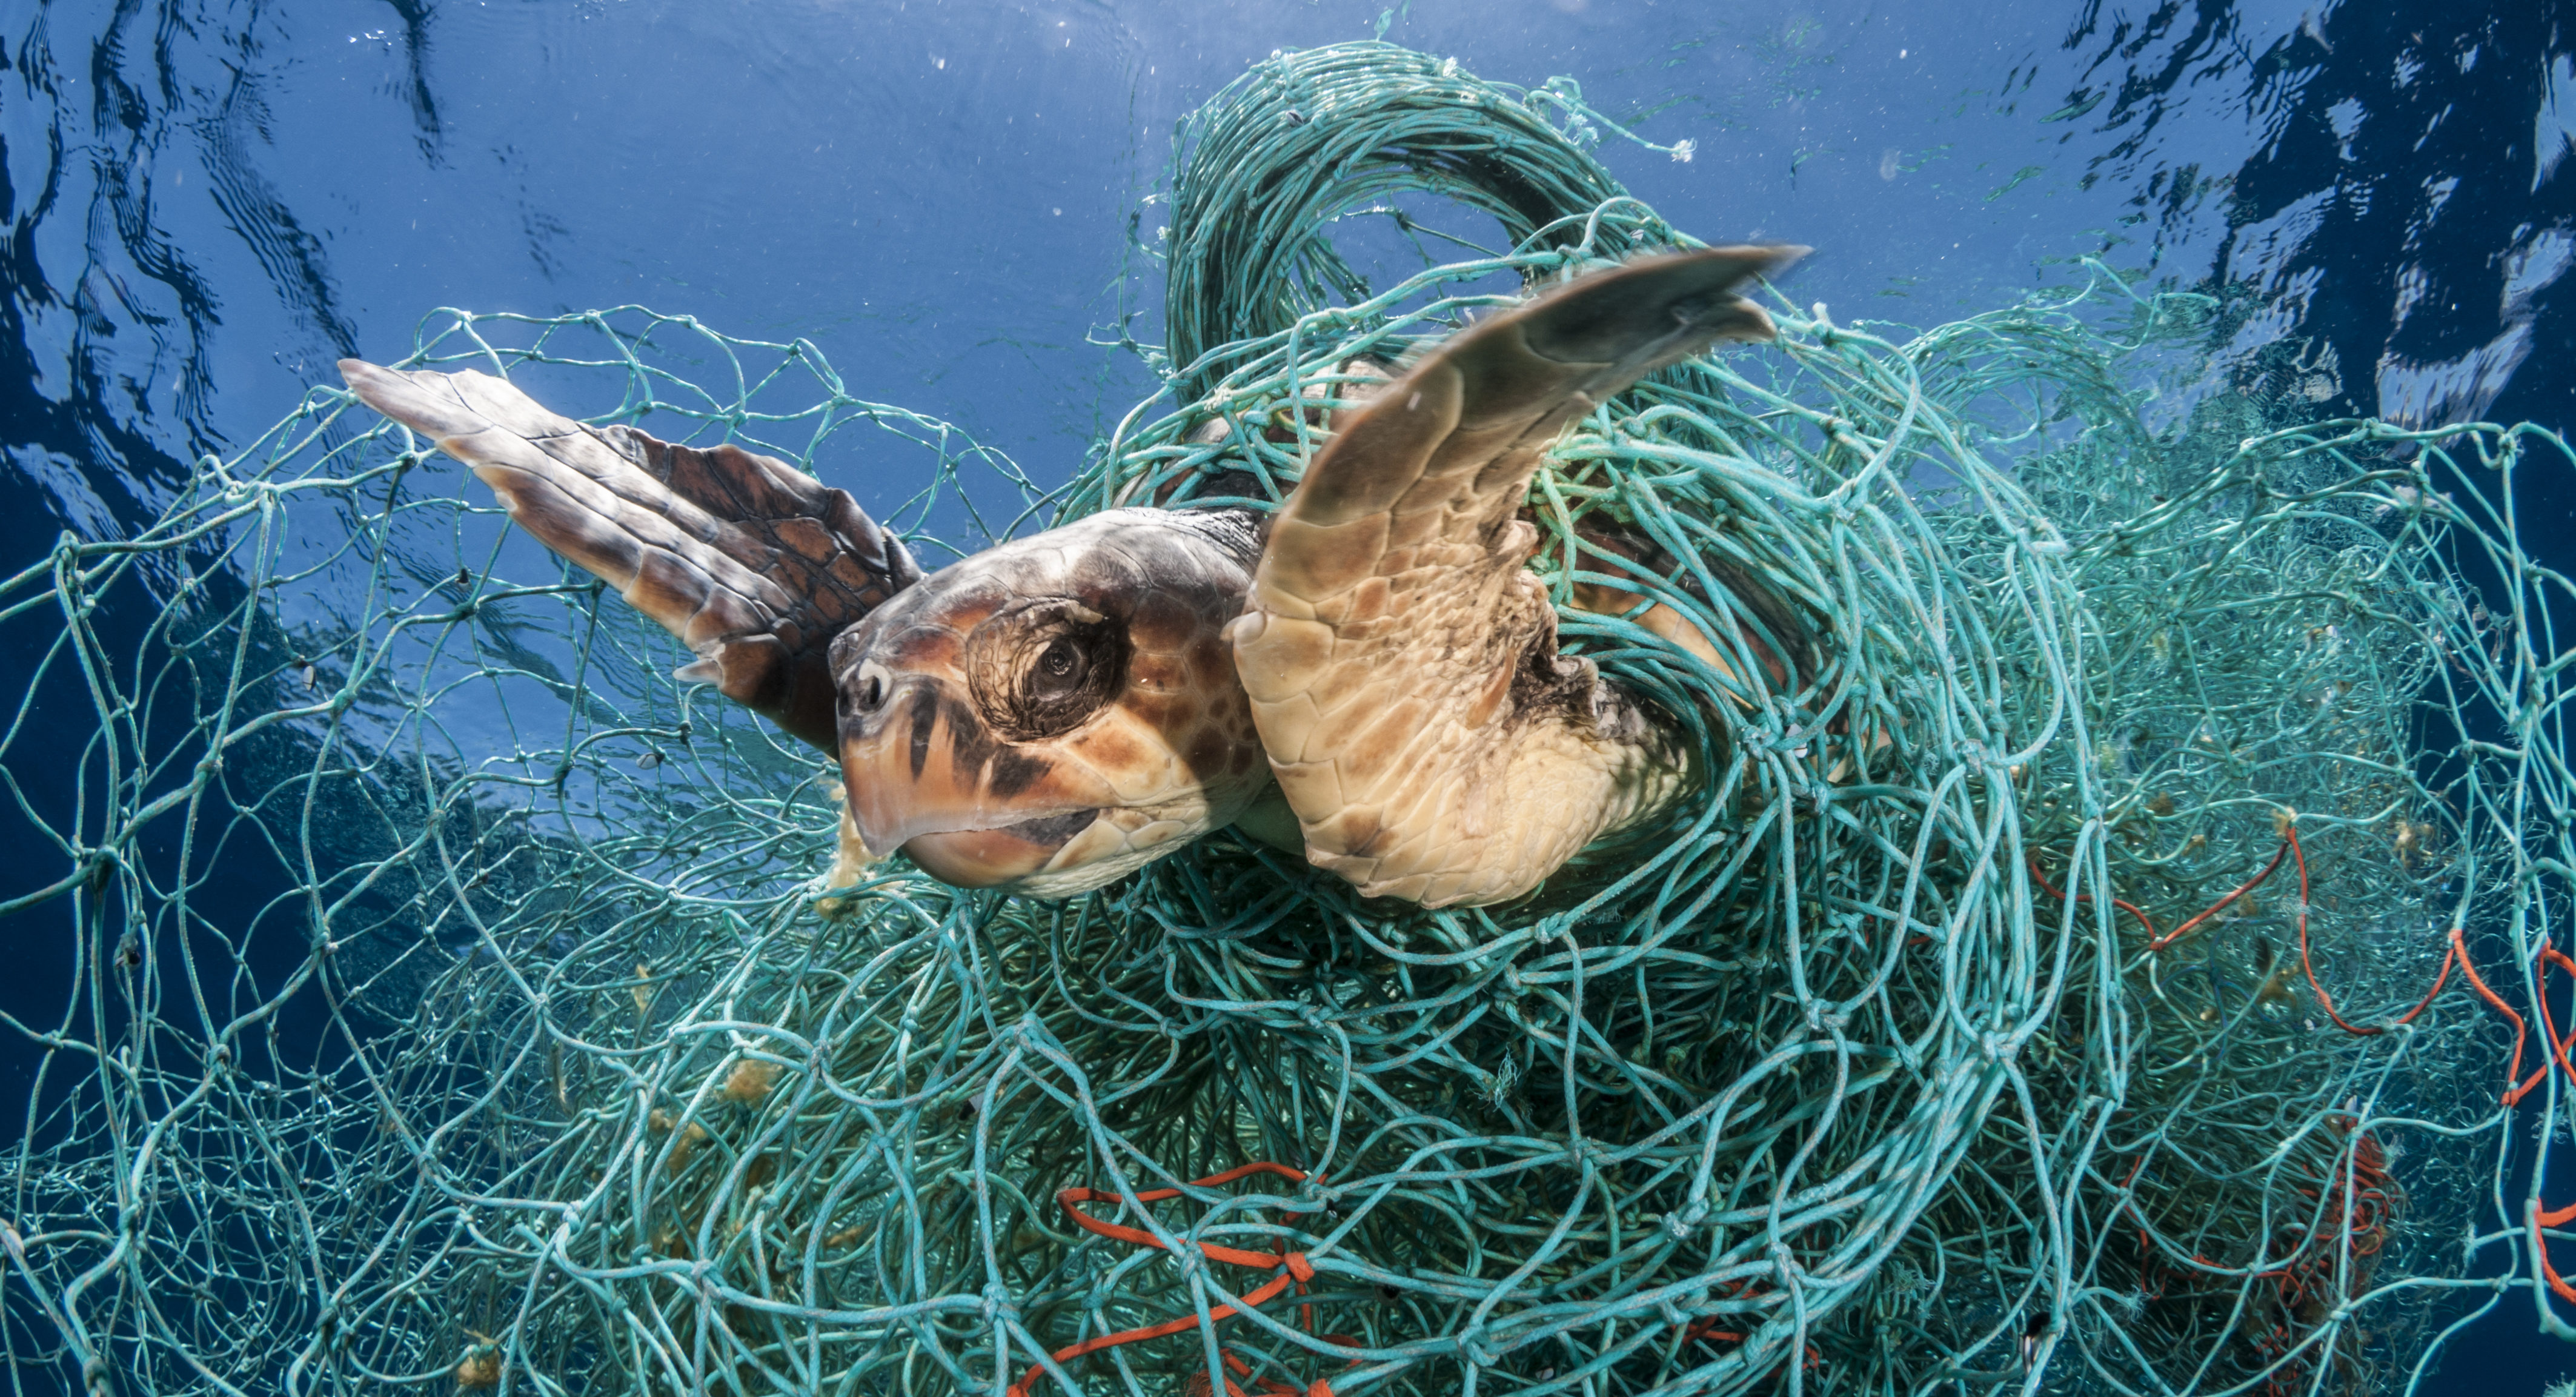 Fishermen clean up 'ghost gear' from Bay of Fundy